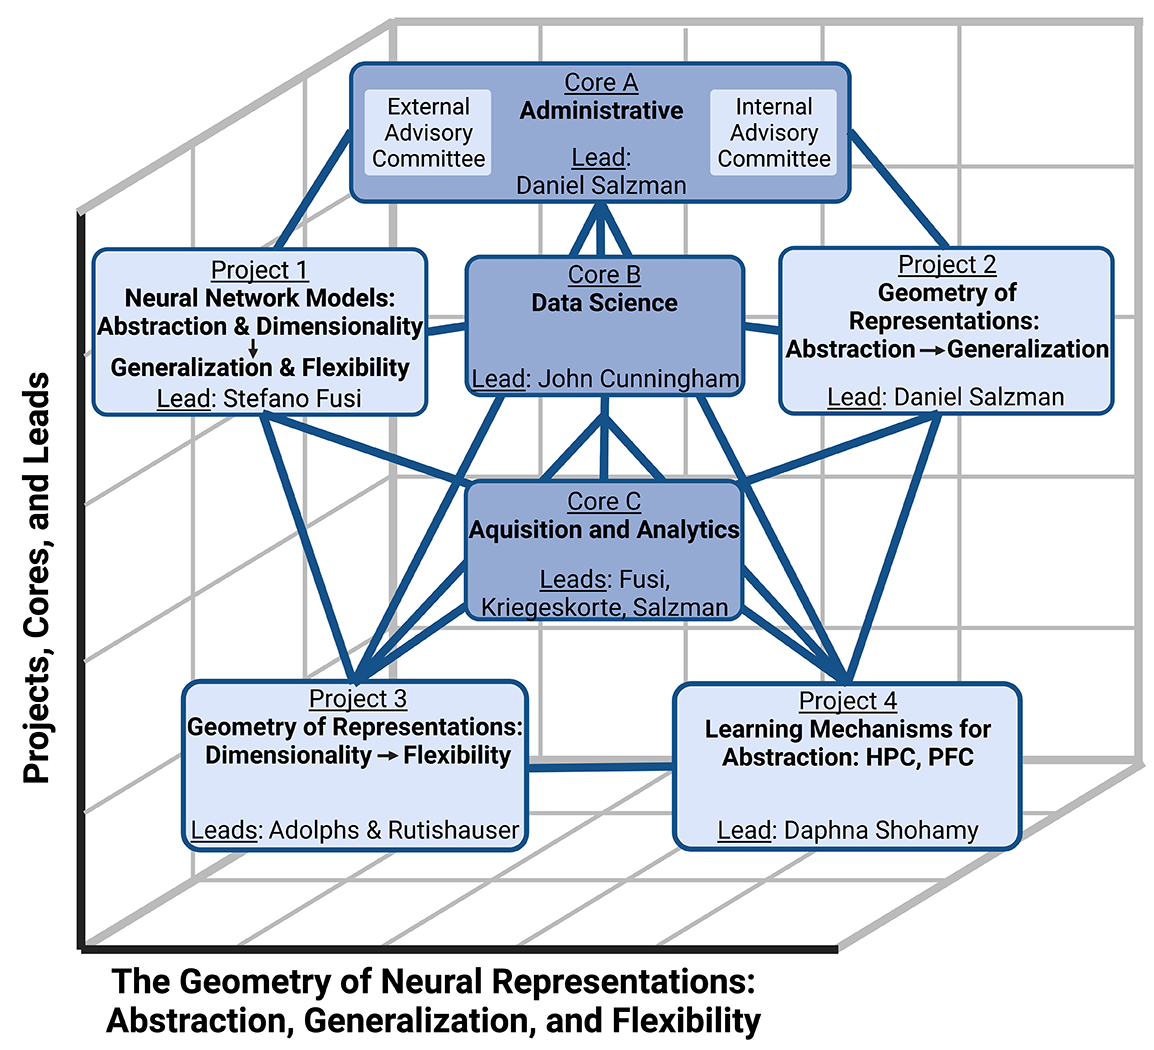 Organizational chart for the U19 "Geometry of Neural Representations: Abstraction, Generalization, Flexibility"